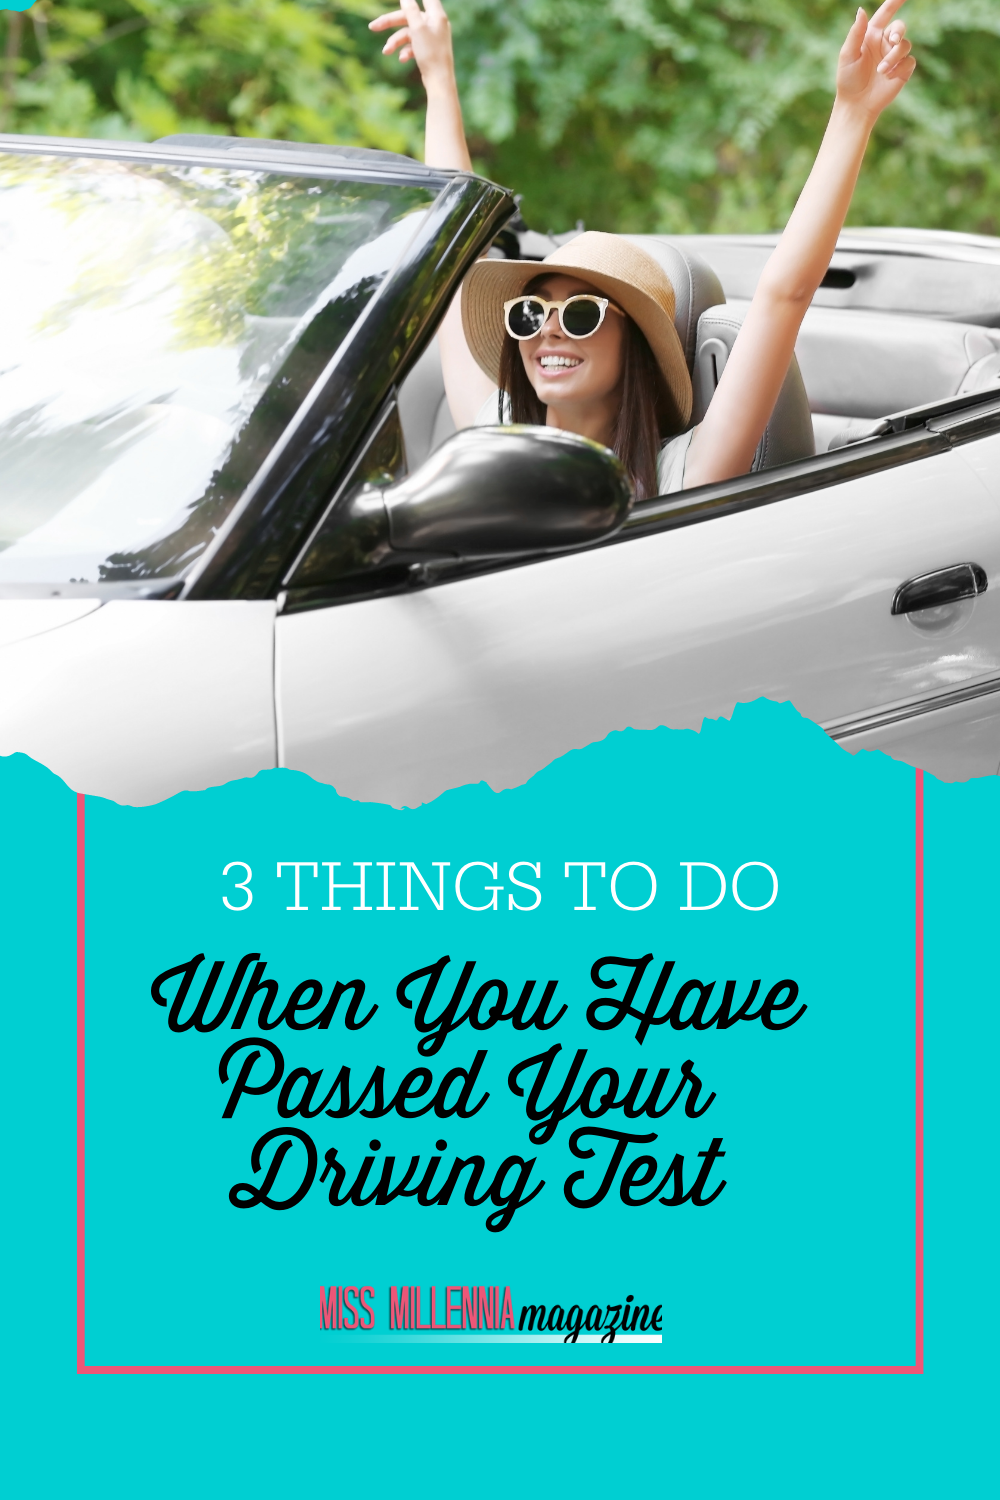 3 Things To Do When You Have Passed Your Driving Test